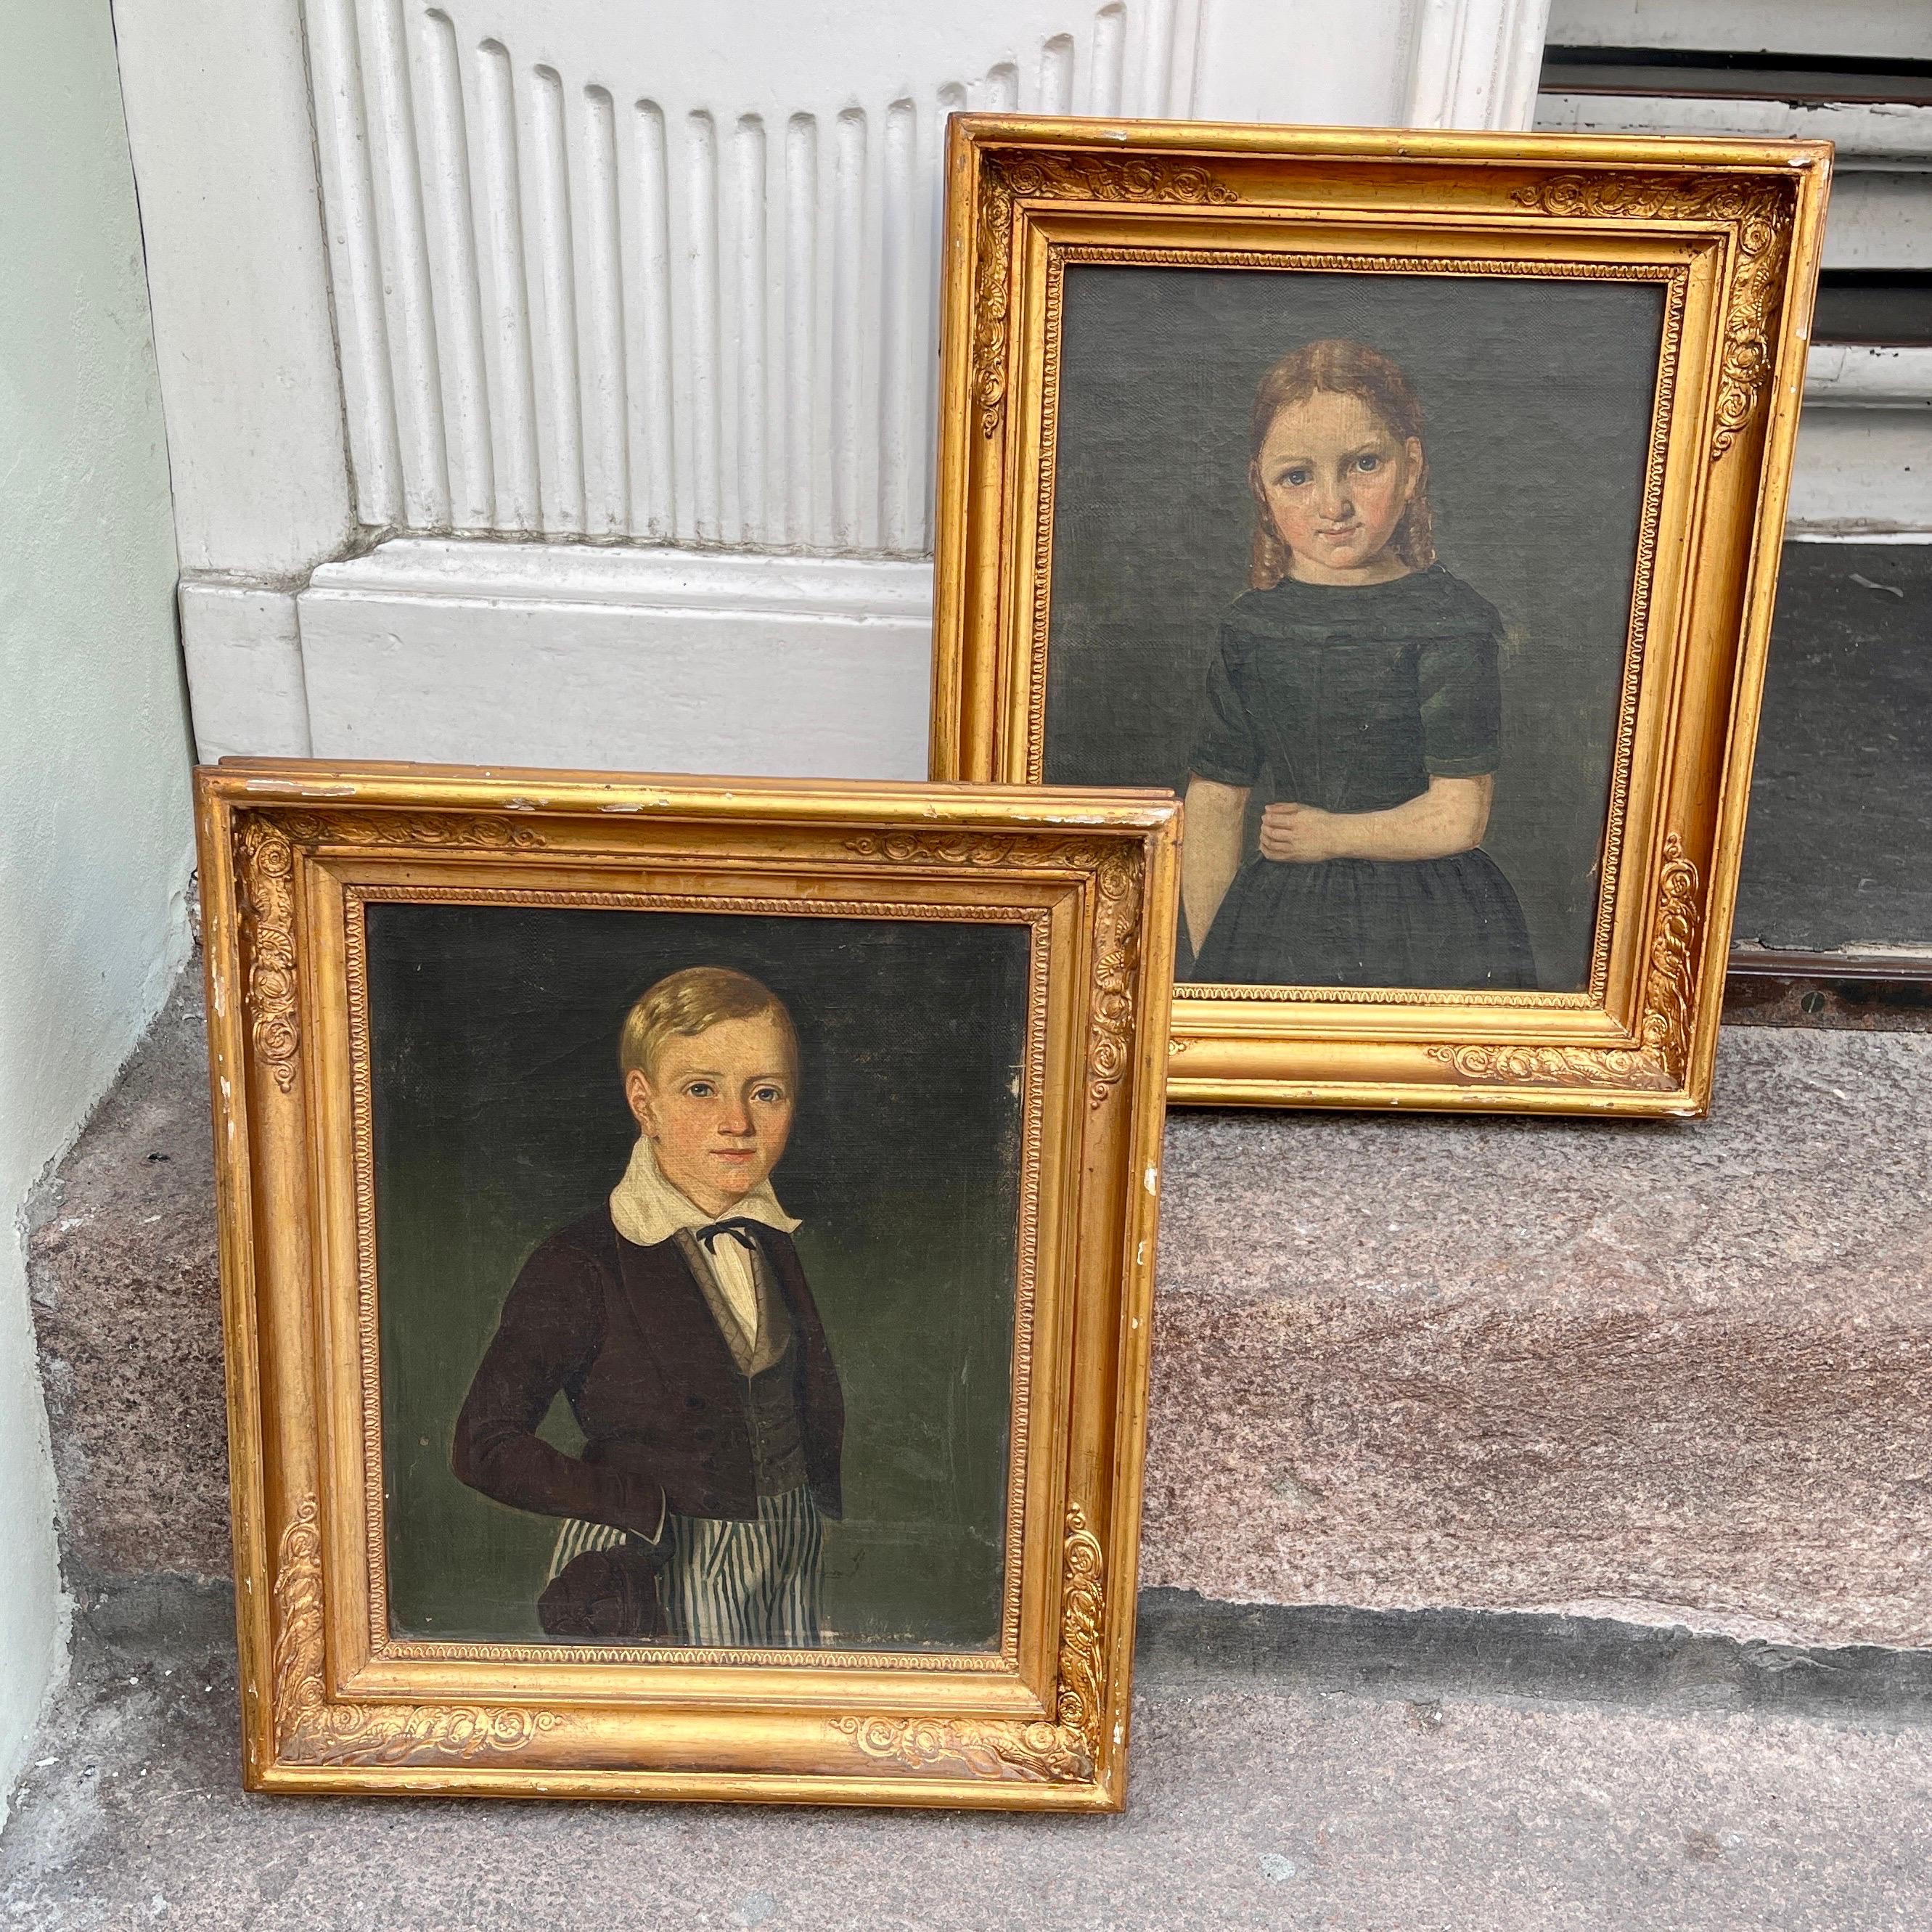 Early 19th Century Children’s Portraits Oil on Canvas, A Pair

Charming pair of Danish Early 19th Century paintings oil on canvas. These child portraits have been set in carved wood gilt ornate frames. These delightful paintings are in wonderful